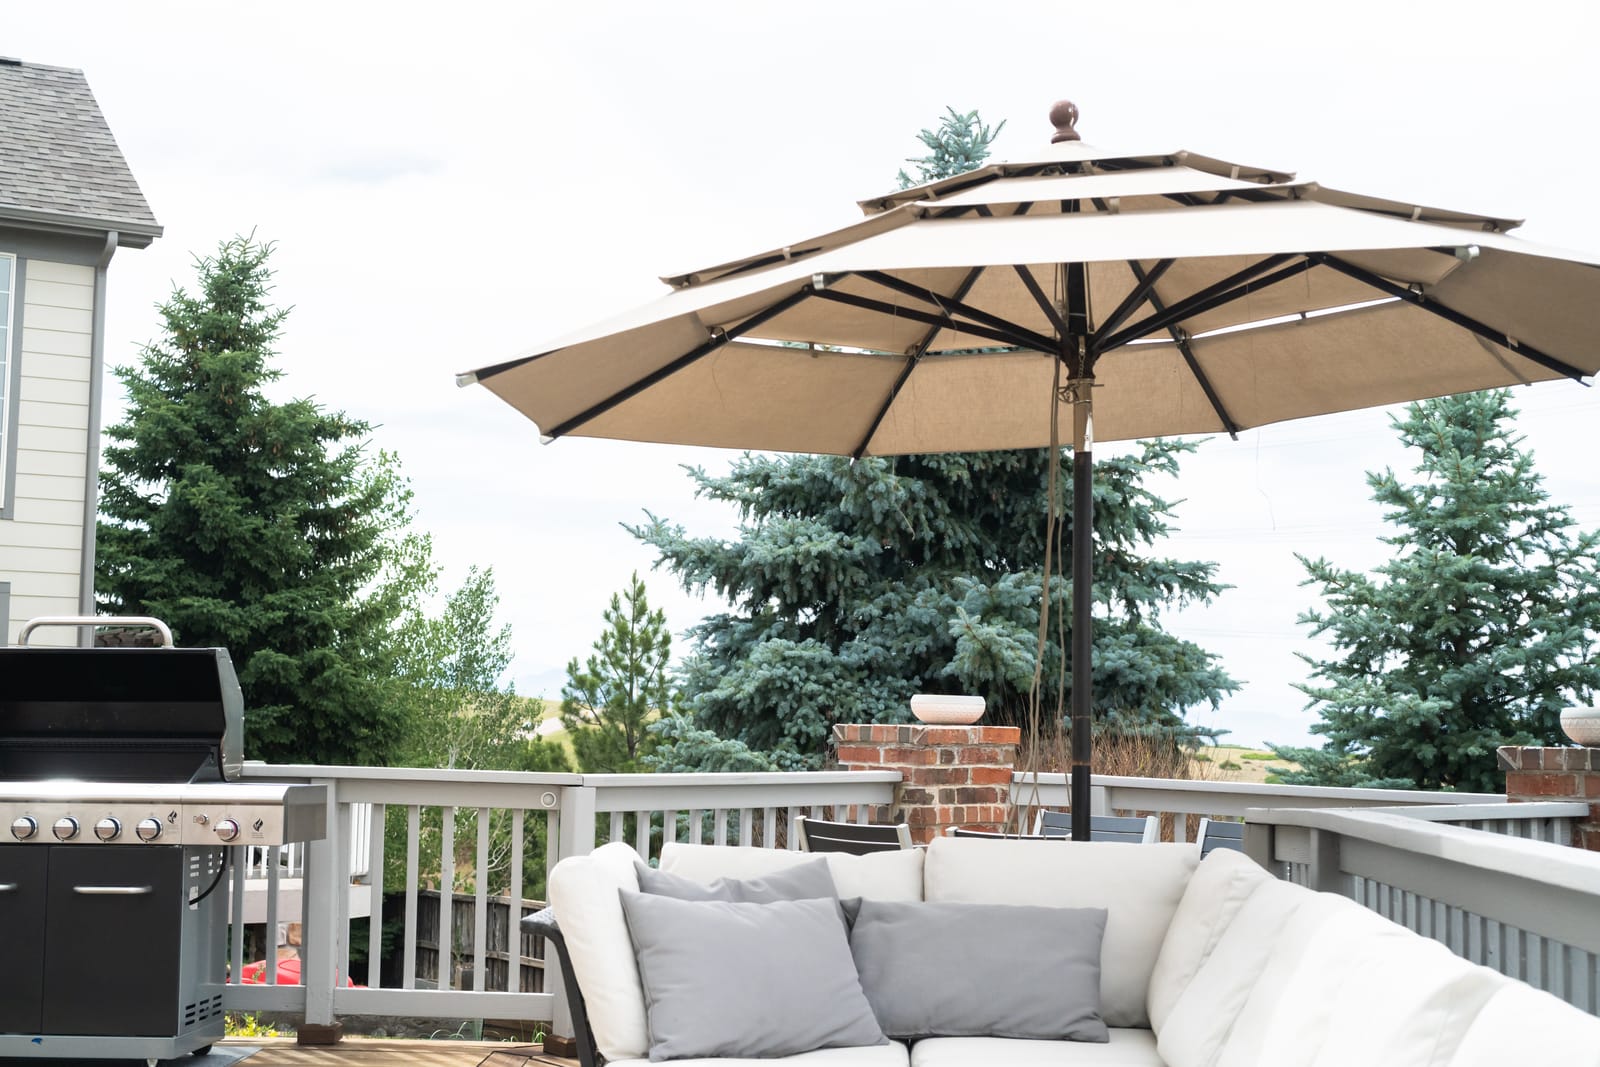 Transform Your Outdoor Space with Stylish Patio Design Ideas